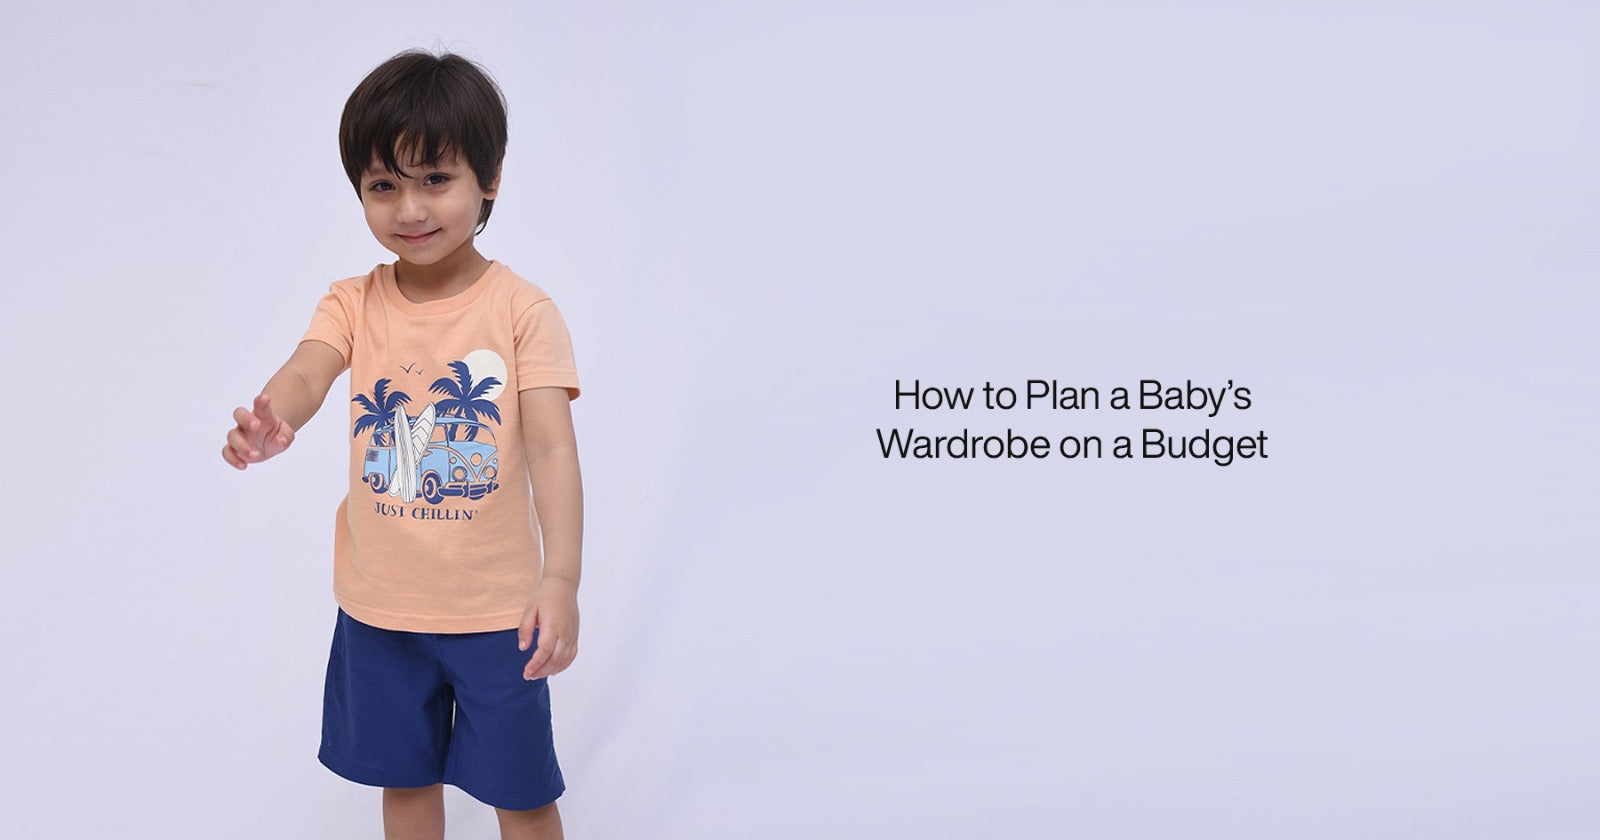 How to Plan a Baby’s Wardrobe on a Budget